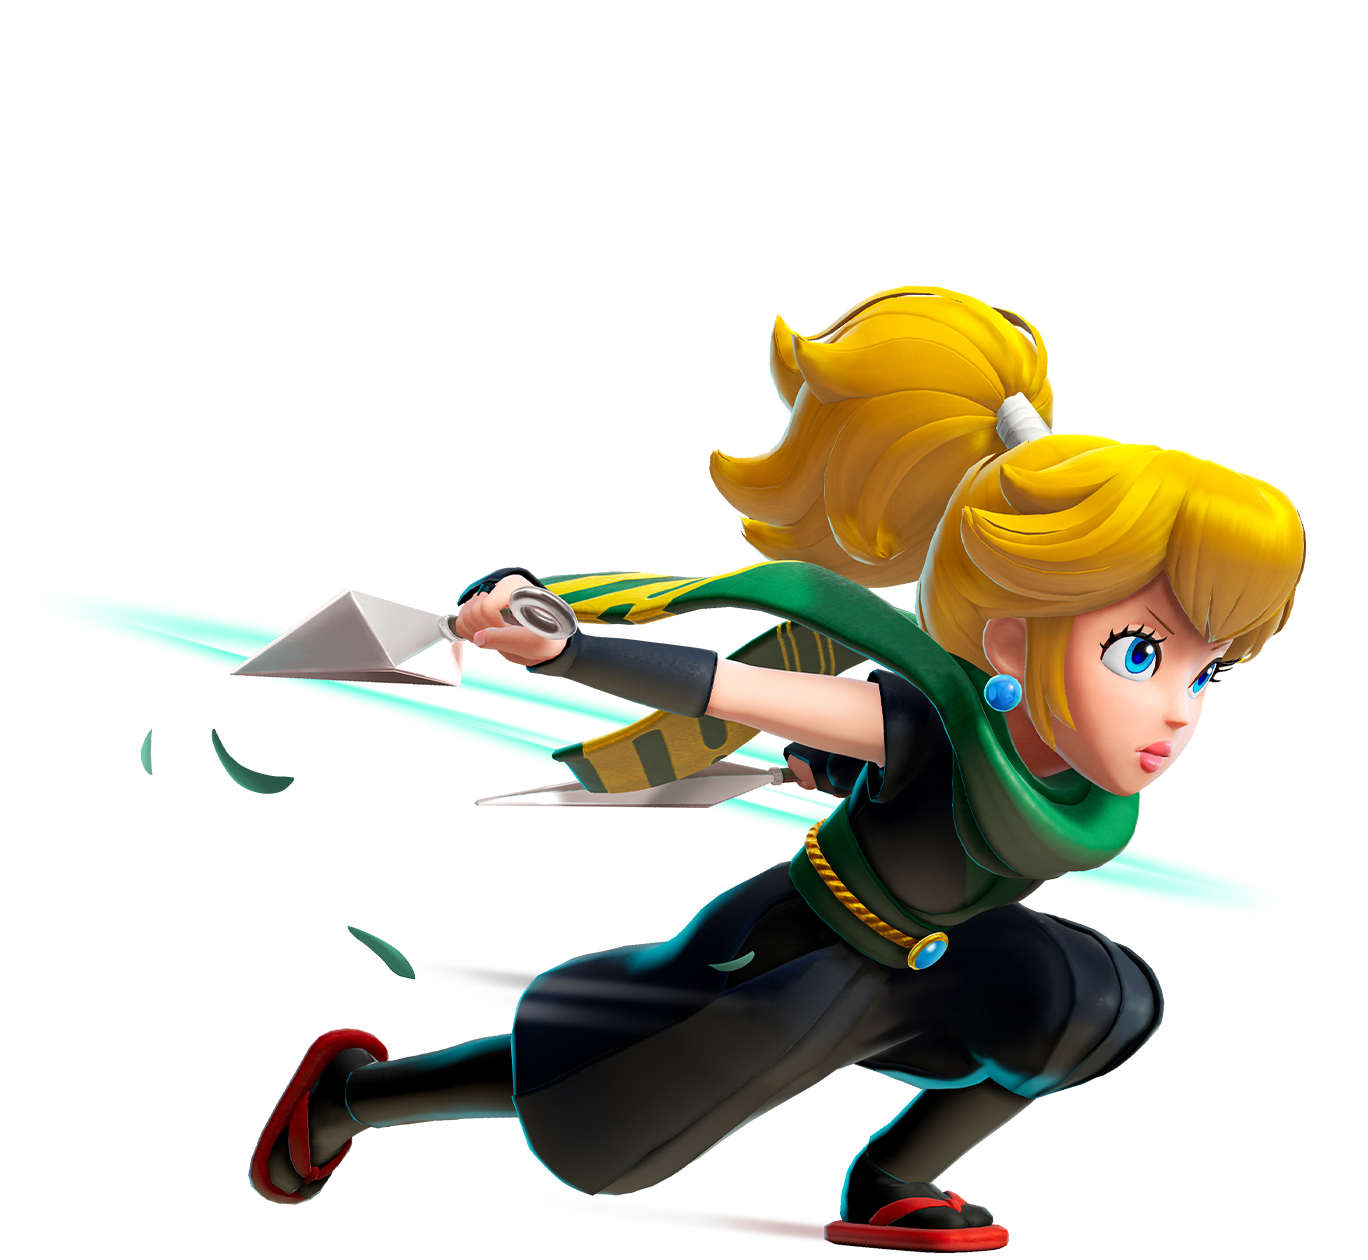 Peach dashes forward, wielding two kunai and dressed in a stealthy black outfit. A long green scarf flutters behind her as she runs.